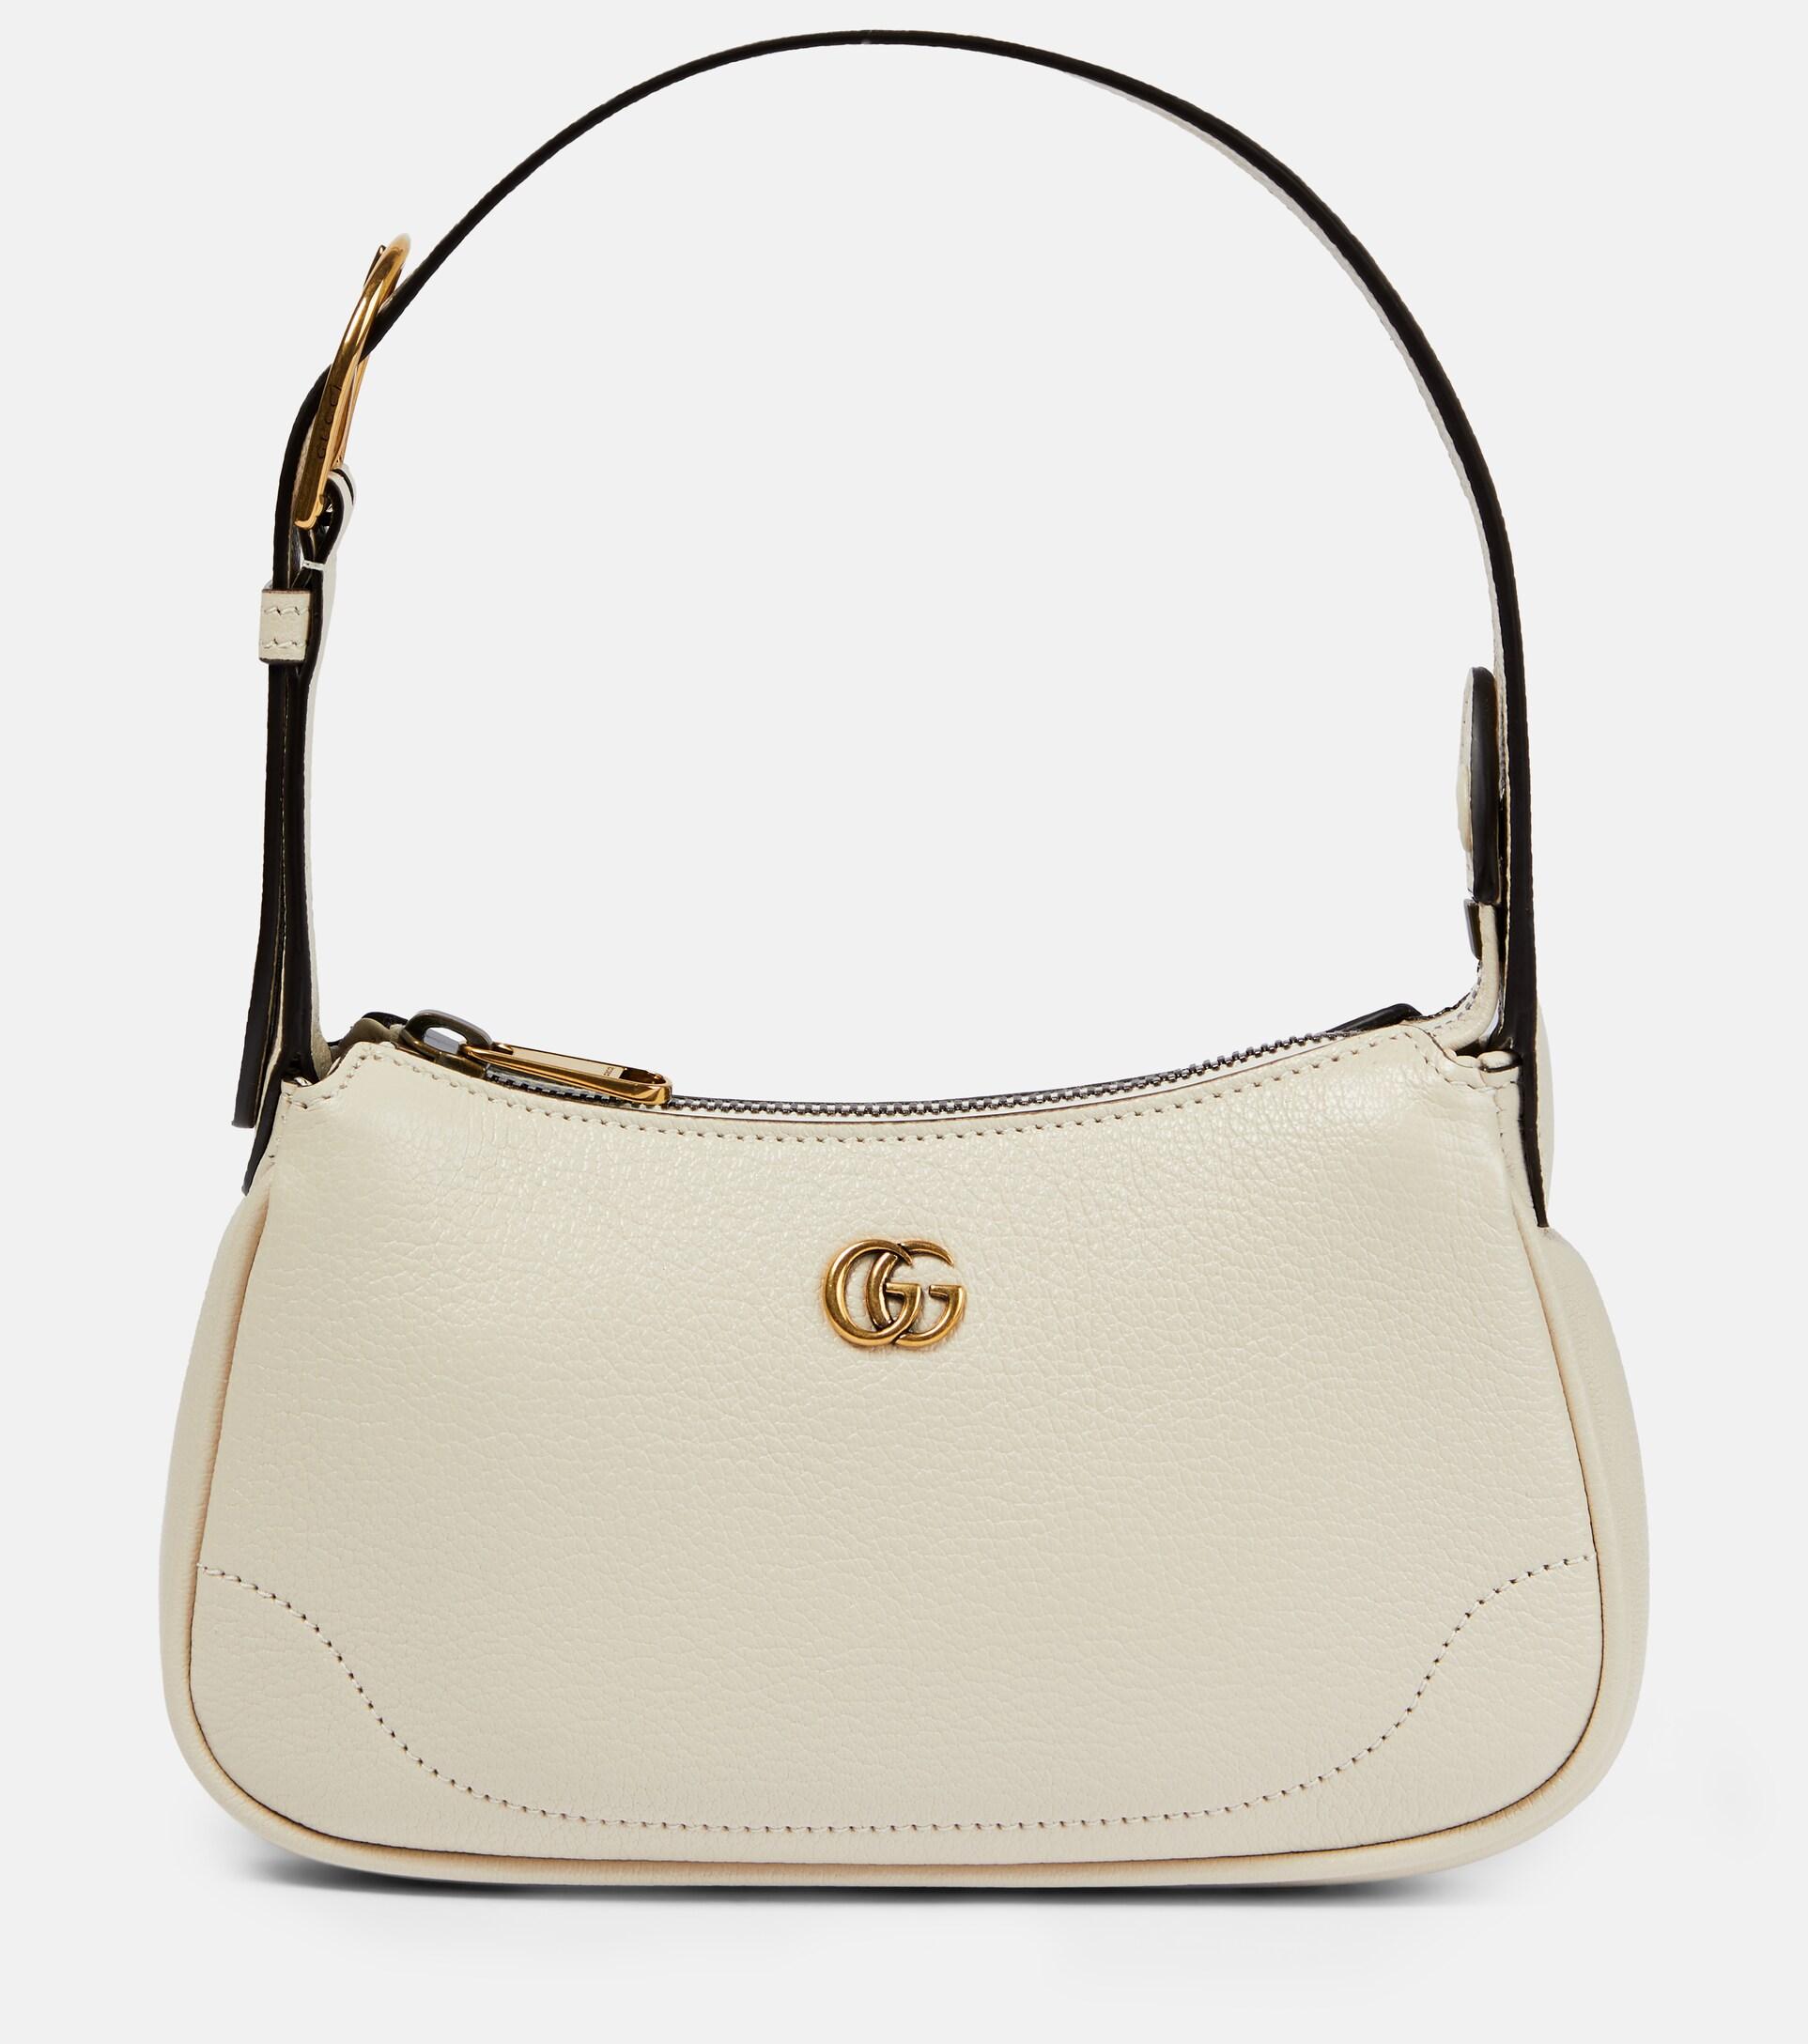 Gucci Aphrodite Small Leather Shoulder Bag in Natural | Lyst